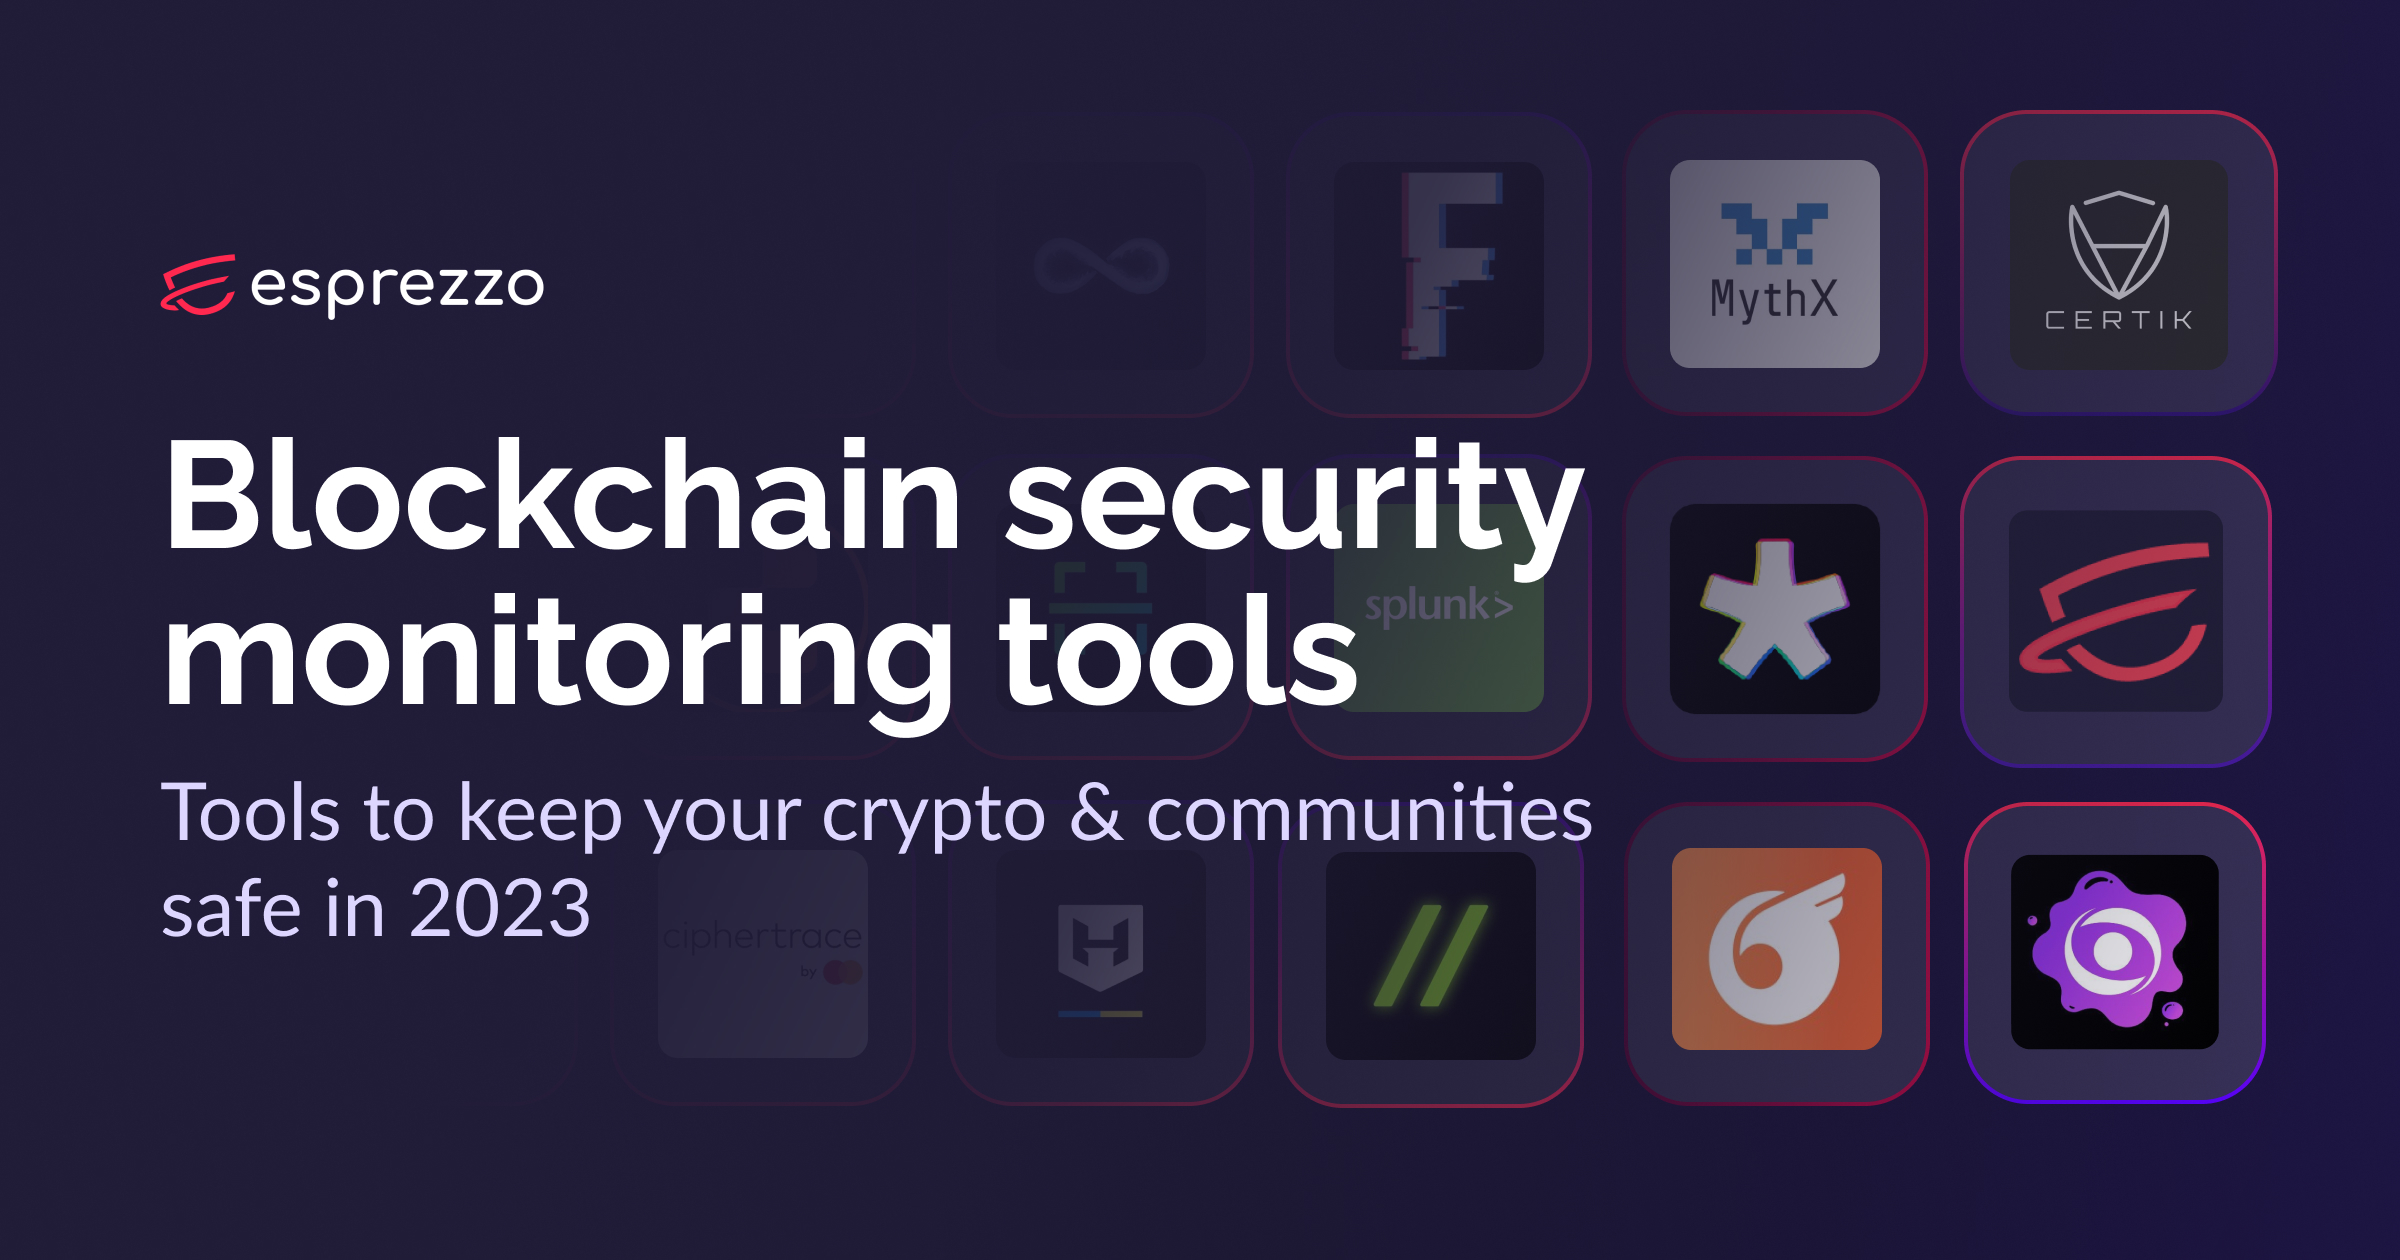 Blockchain security monitoring tools: Forta Network, ChainAegis, and Dispatch 